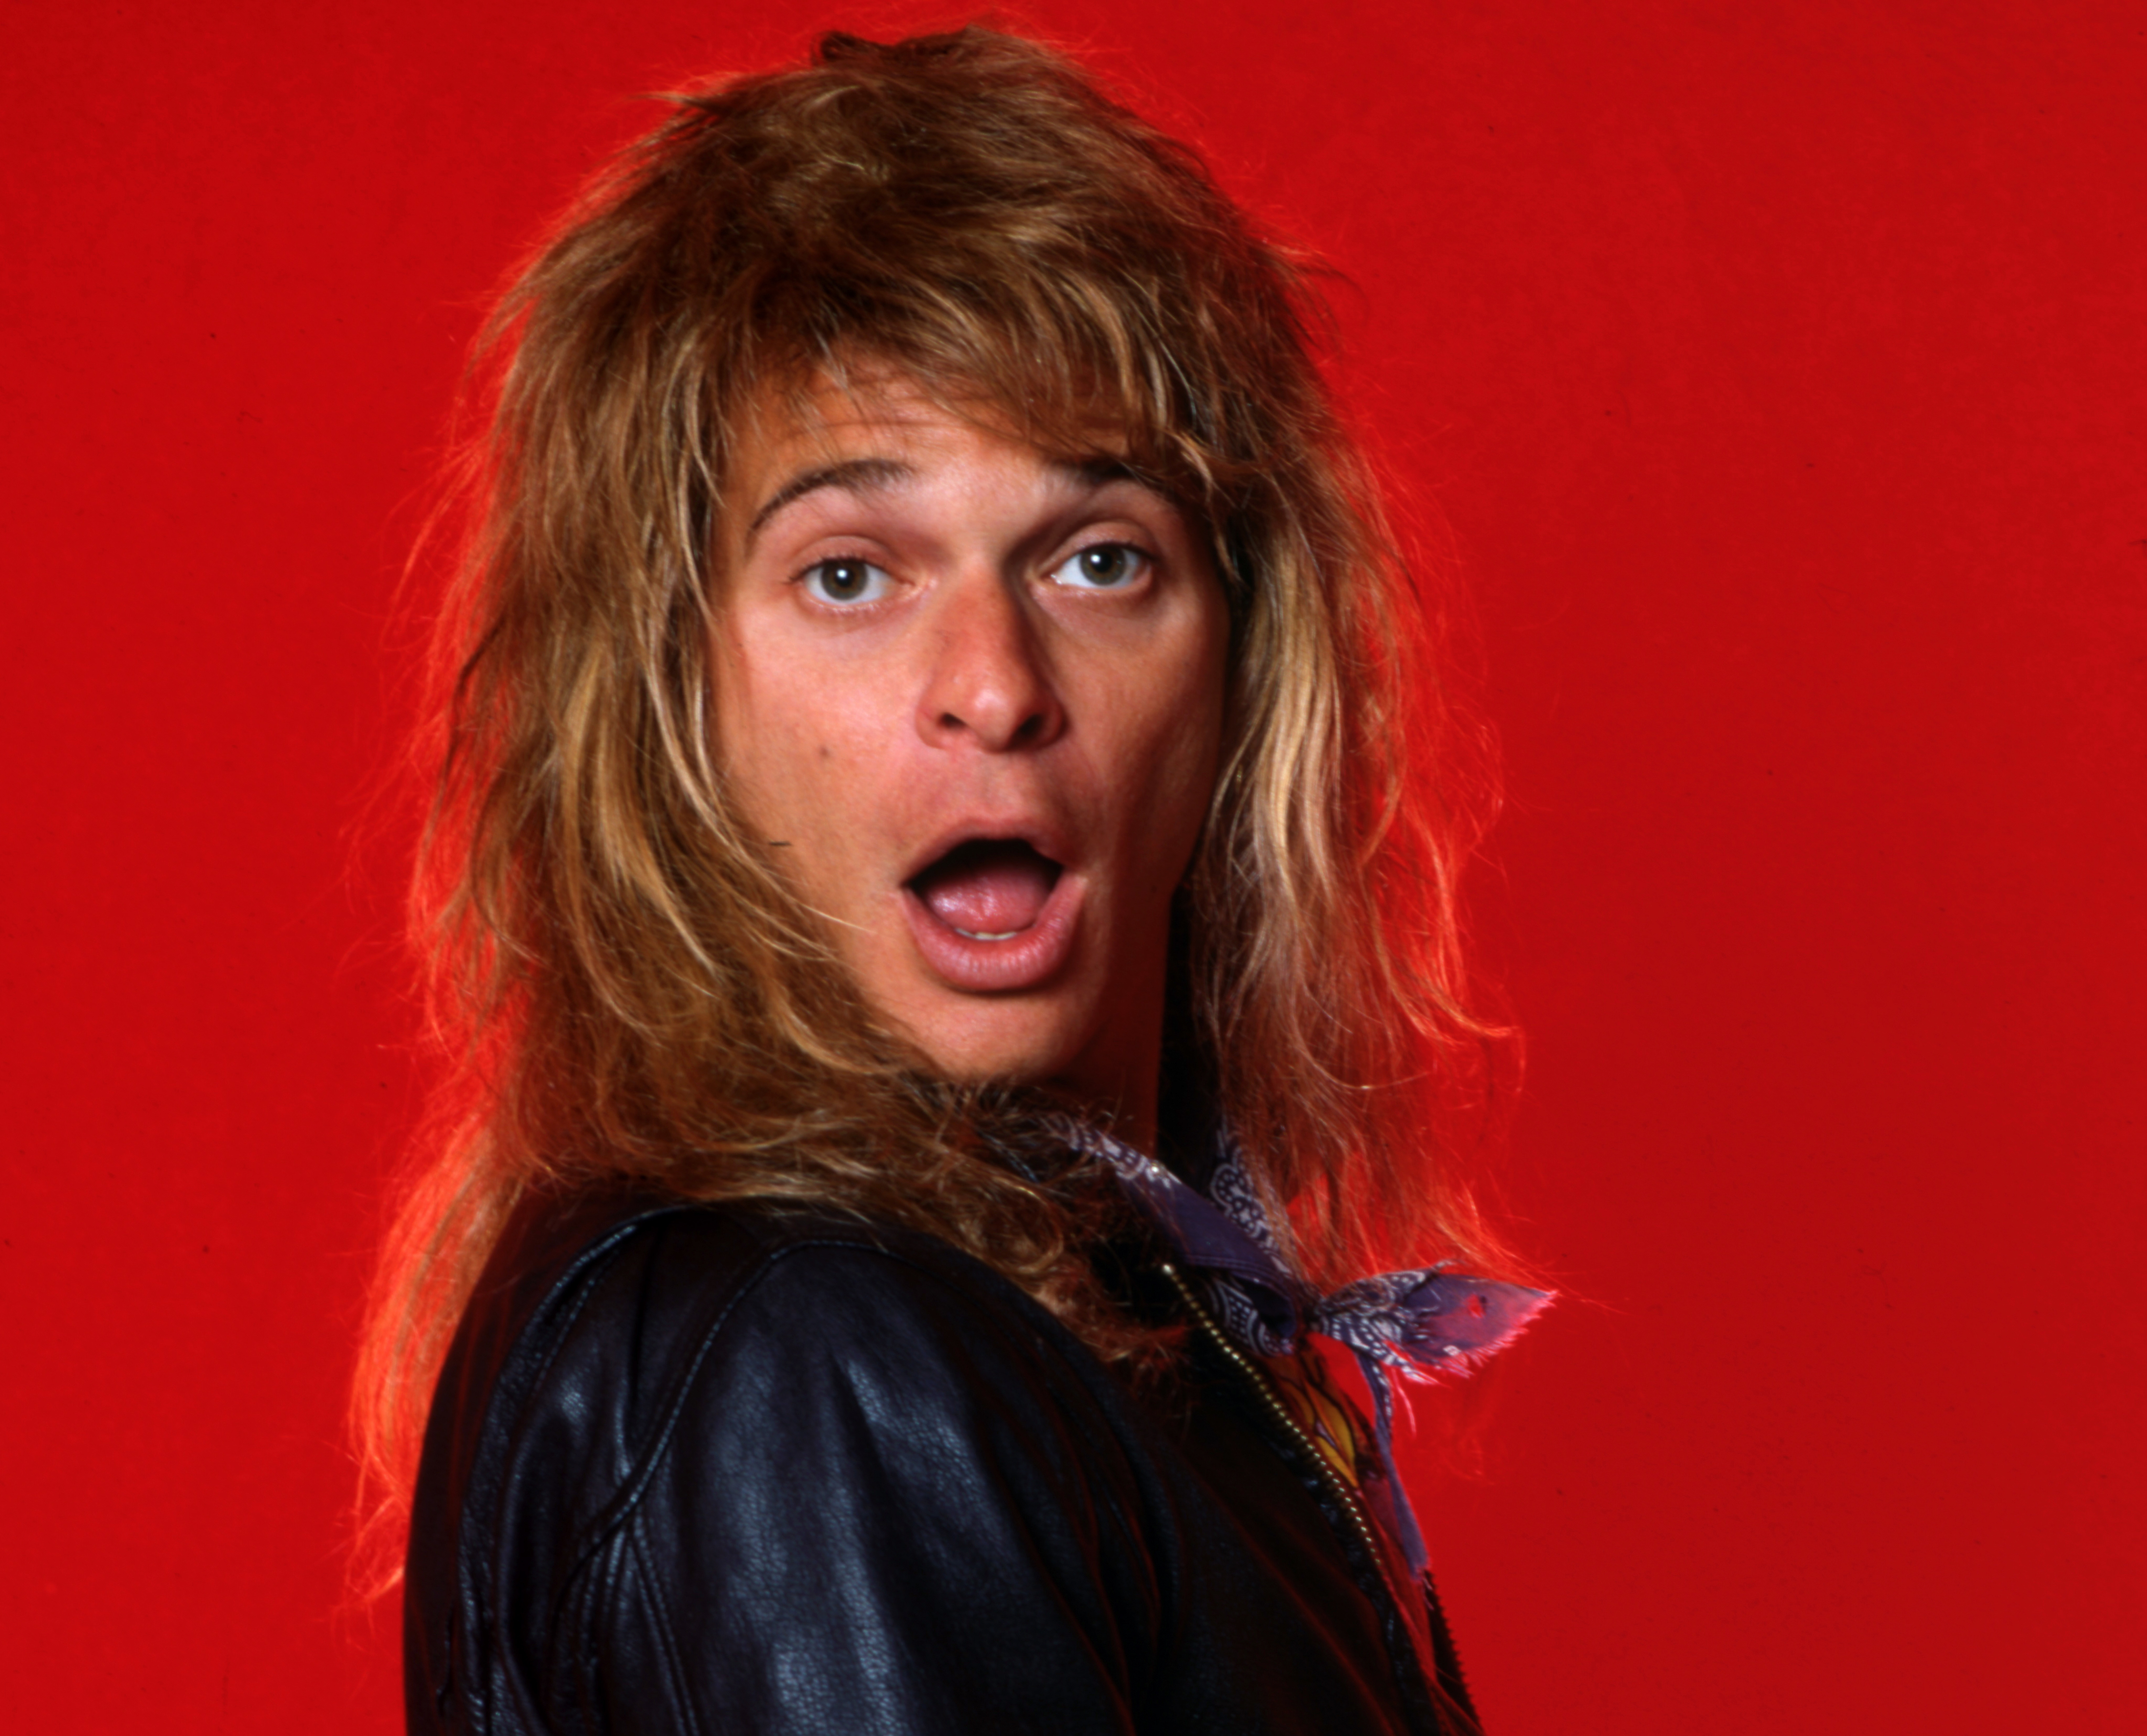 David Lee Roth Almost Predicted the Exact Date of His Retirement in 1991 ‘A Lil Ain’t Enough’ Video